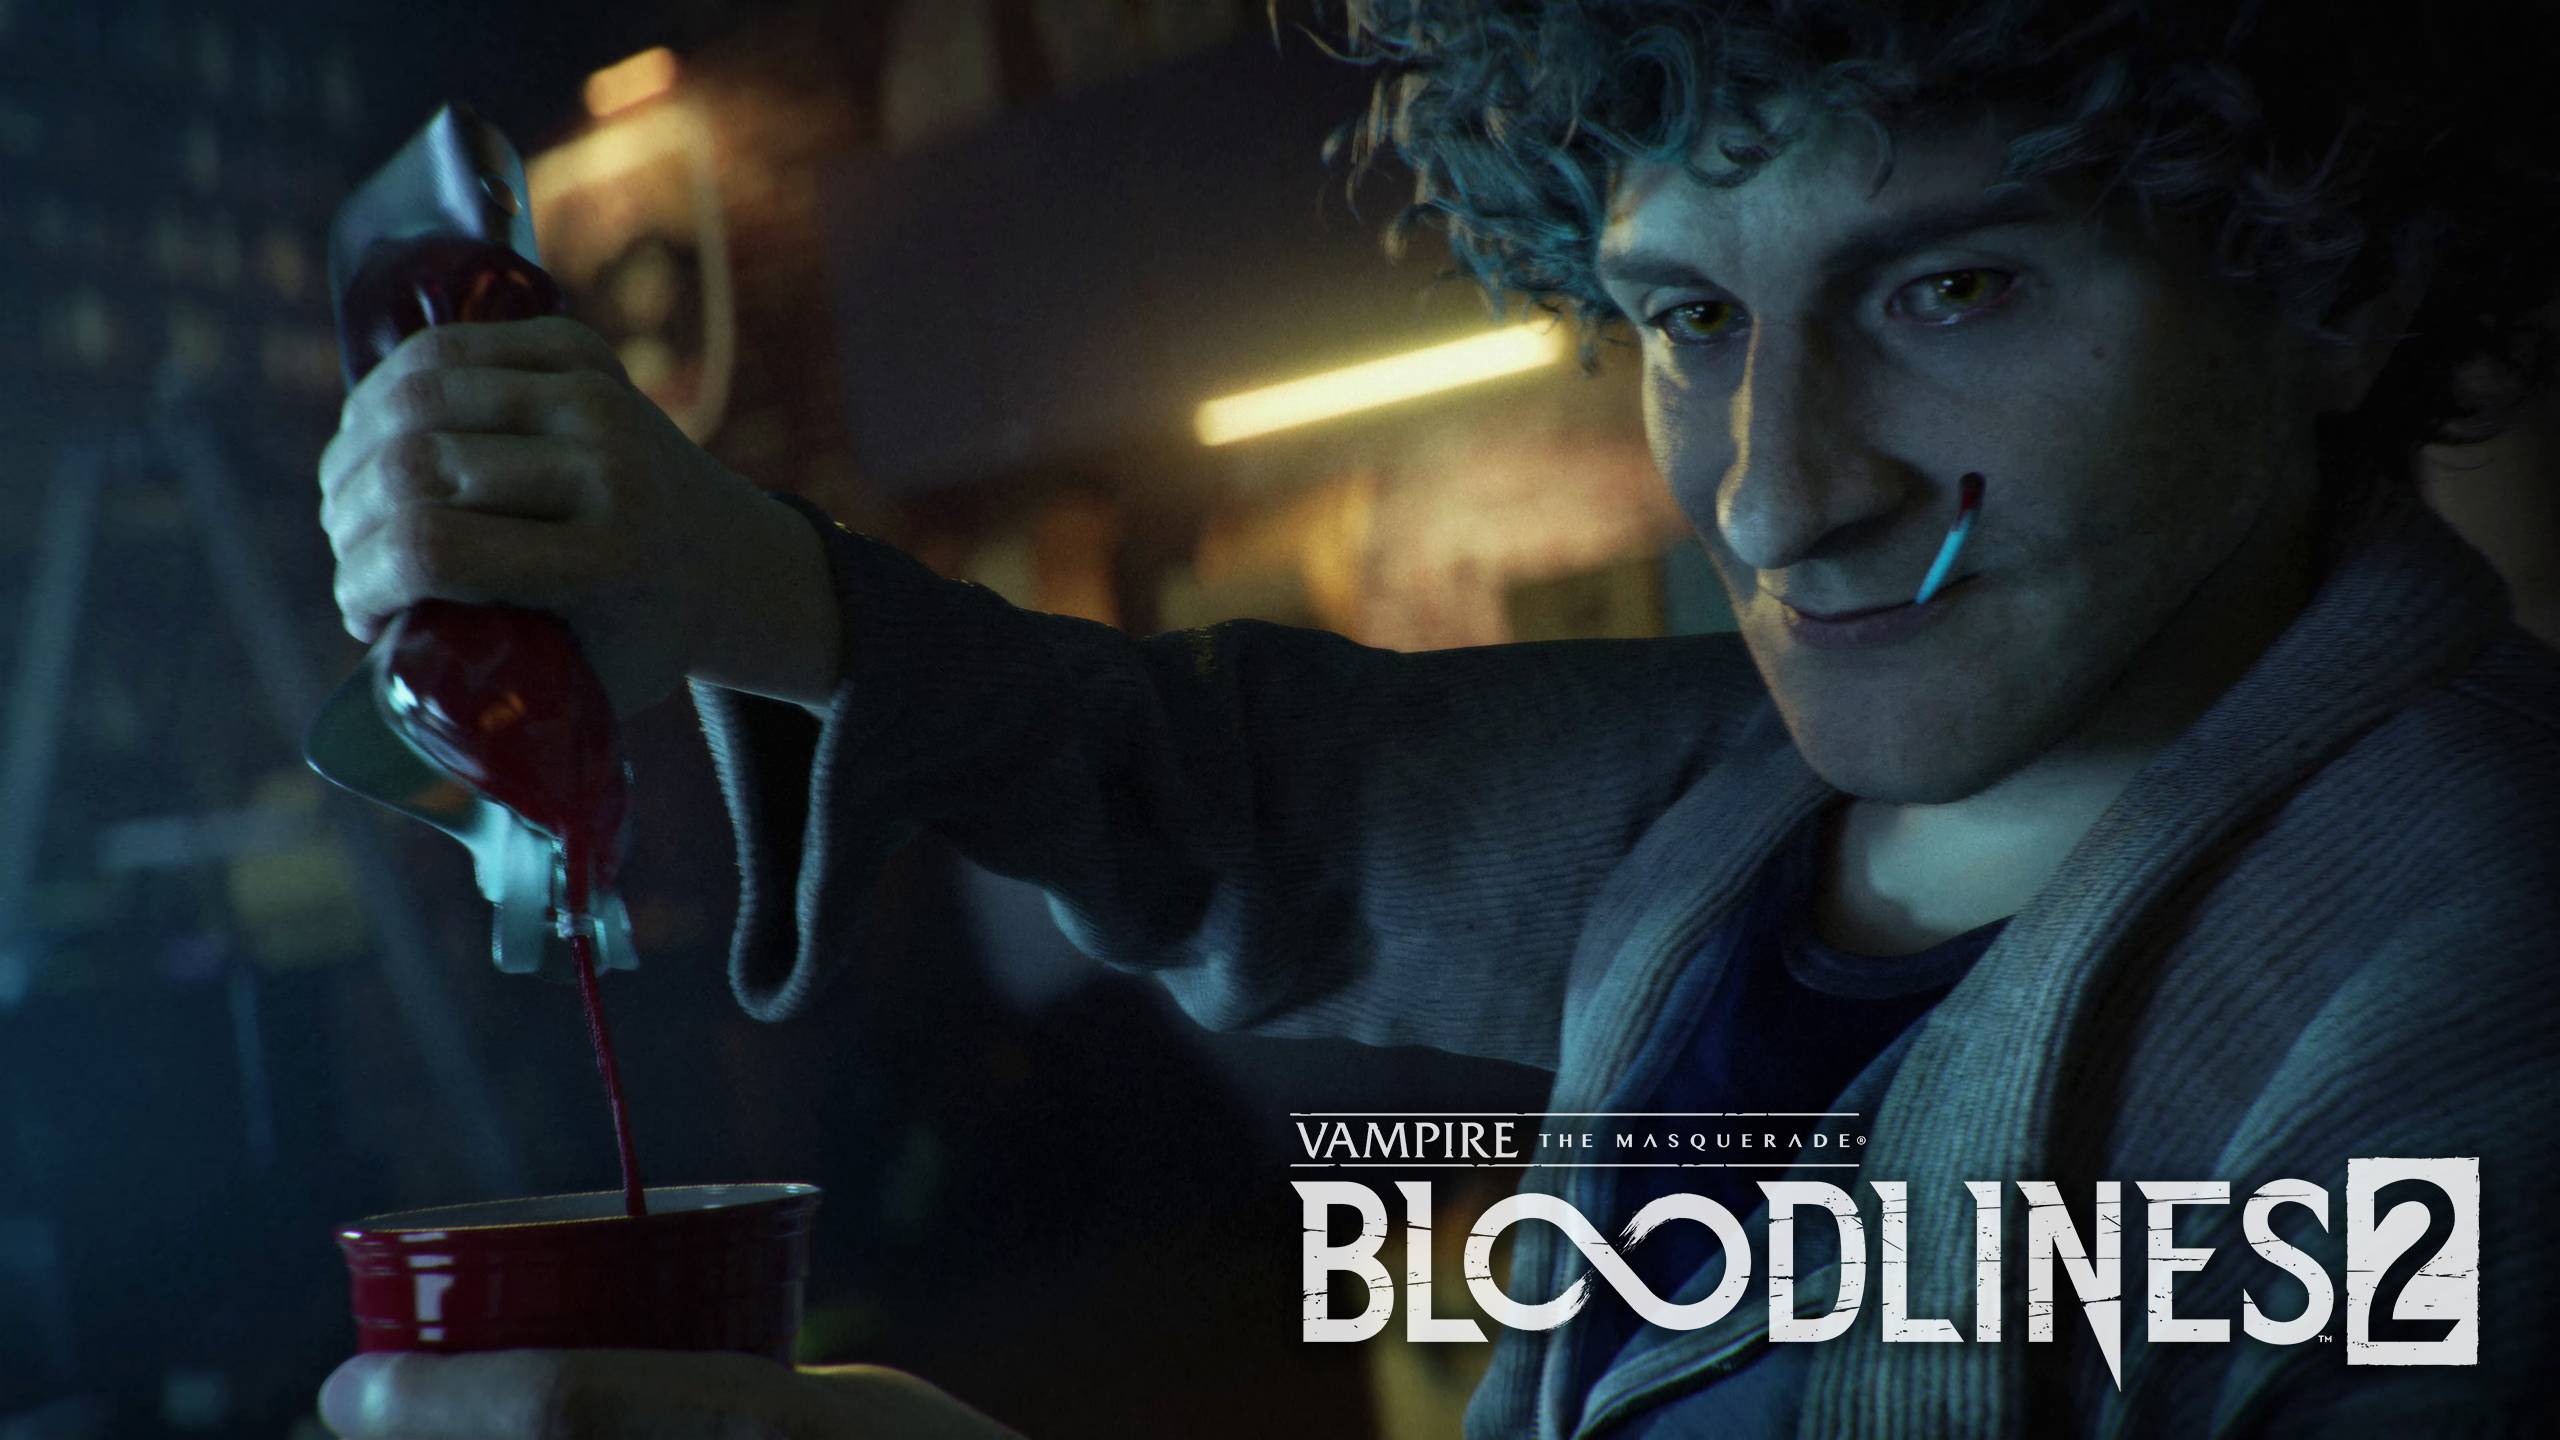 Video Game Vampire: The Masquerade - Bloodlines 2 HD Wallpaper | Background Image